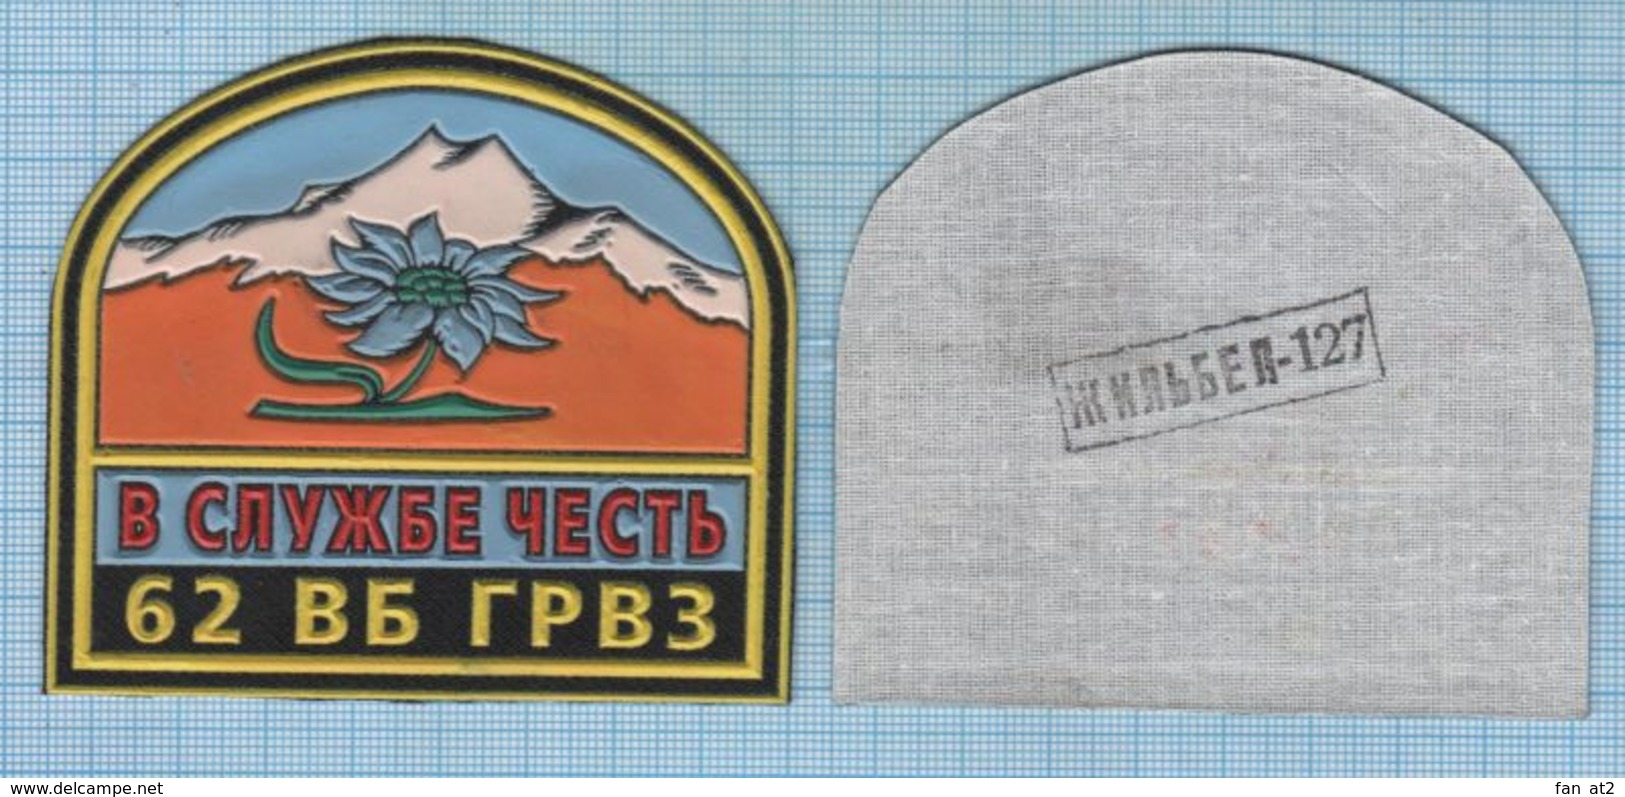 RUSSIA / Patch Abzeichen Parche Ecusson / The Group Of Russian Troops In The Caucasus. South Georgia. Edelweiss. 1990s - Escudos En Tela